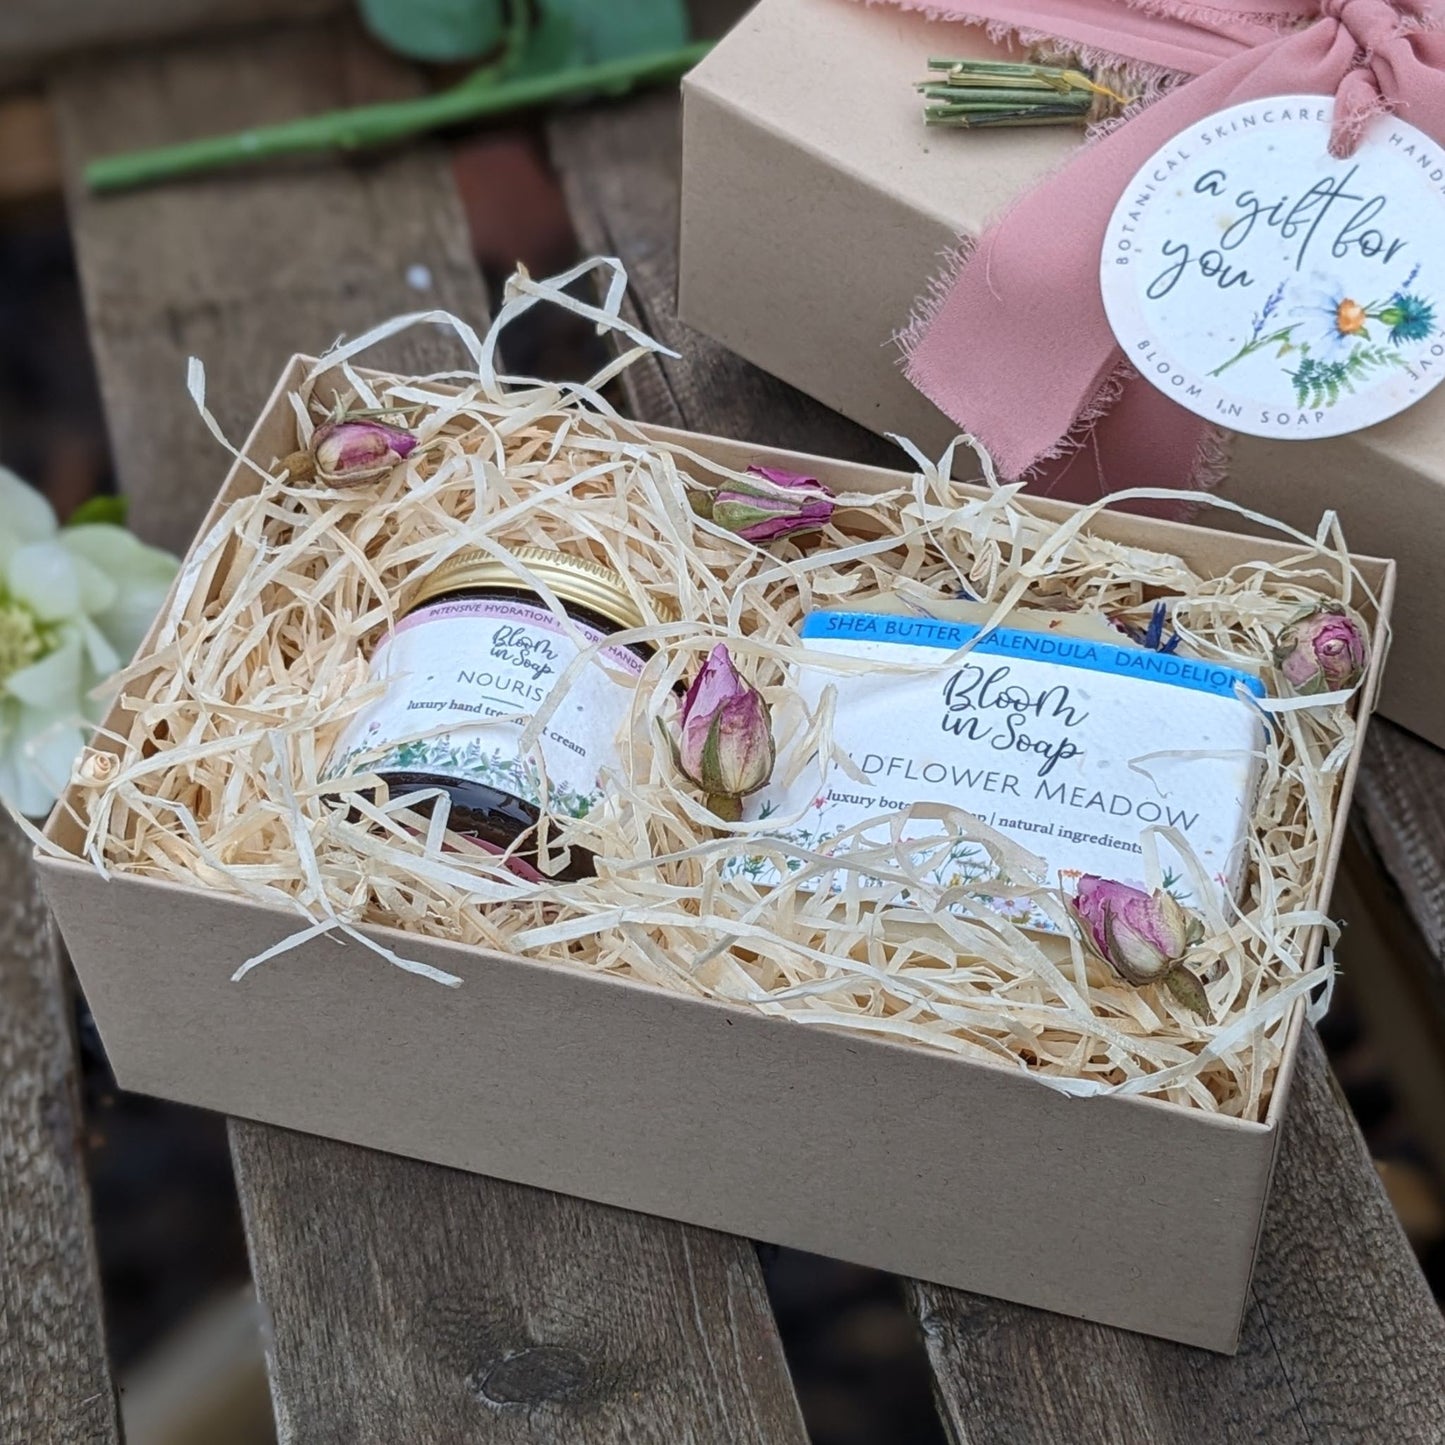 hand cream gift set from Bloom In Soap